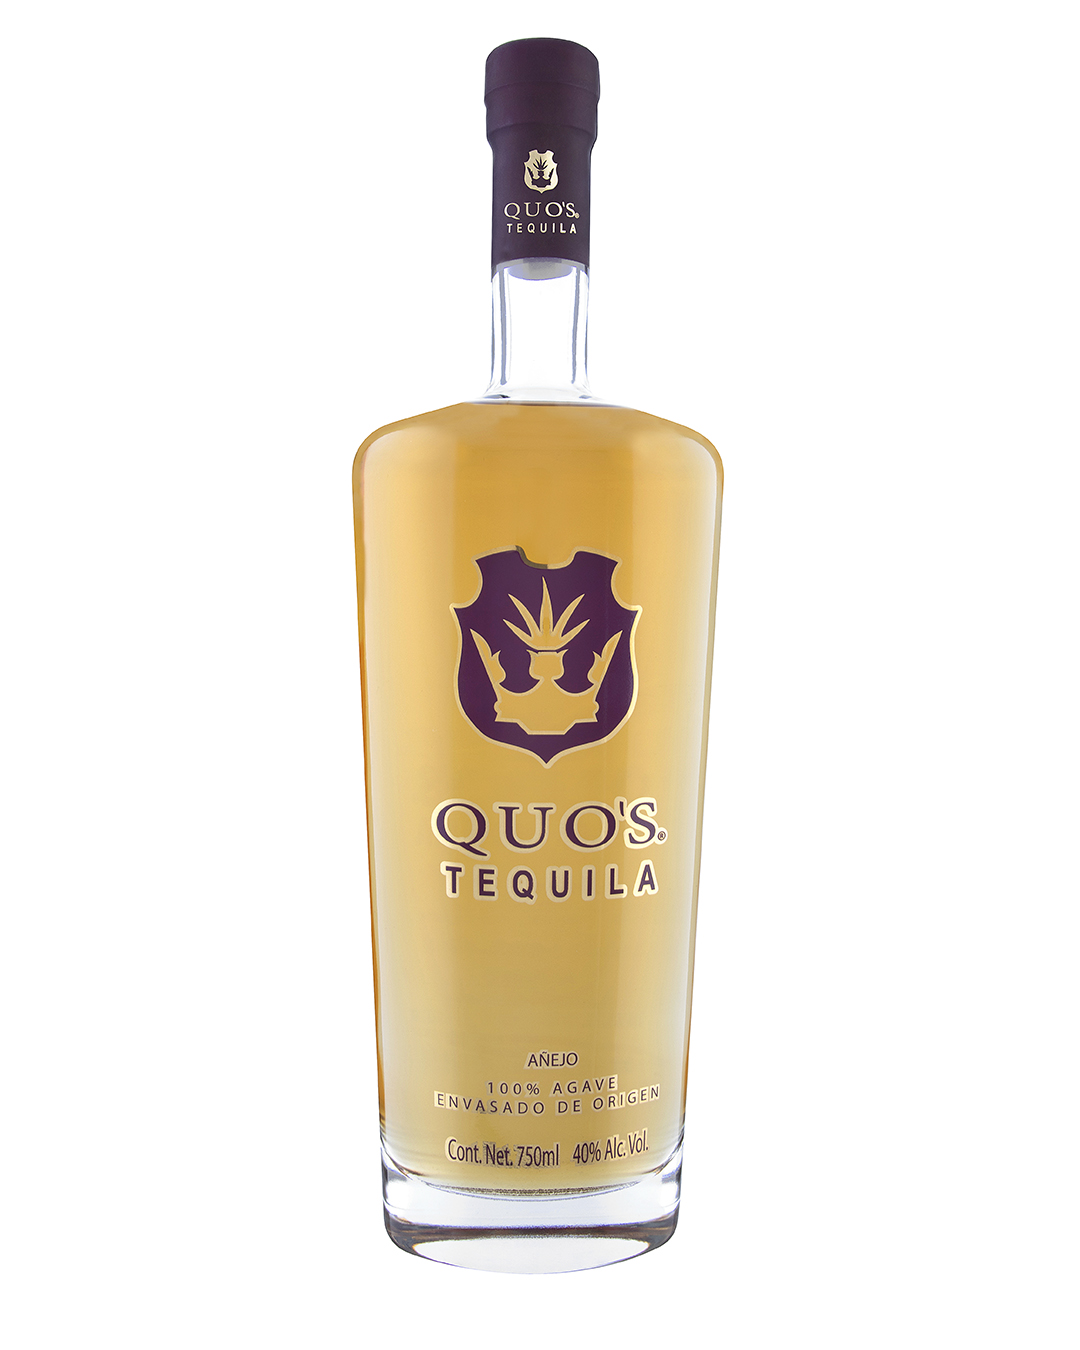 TEQUILA QUOS ANEJO